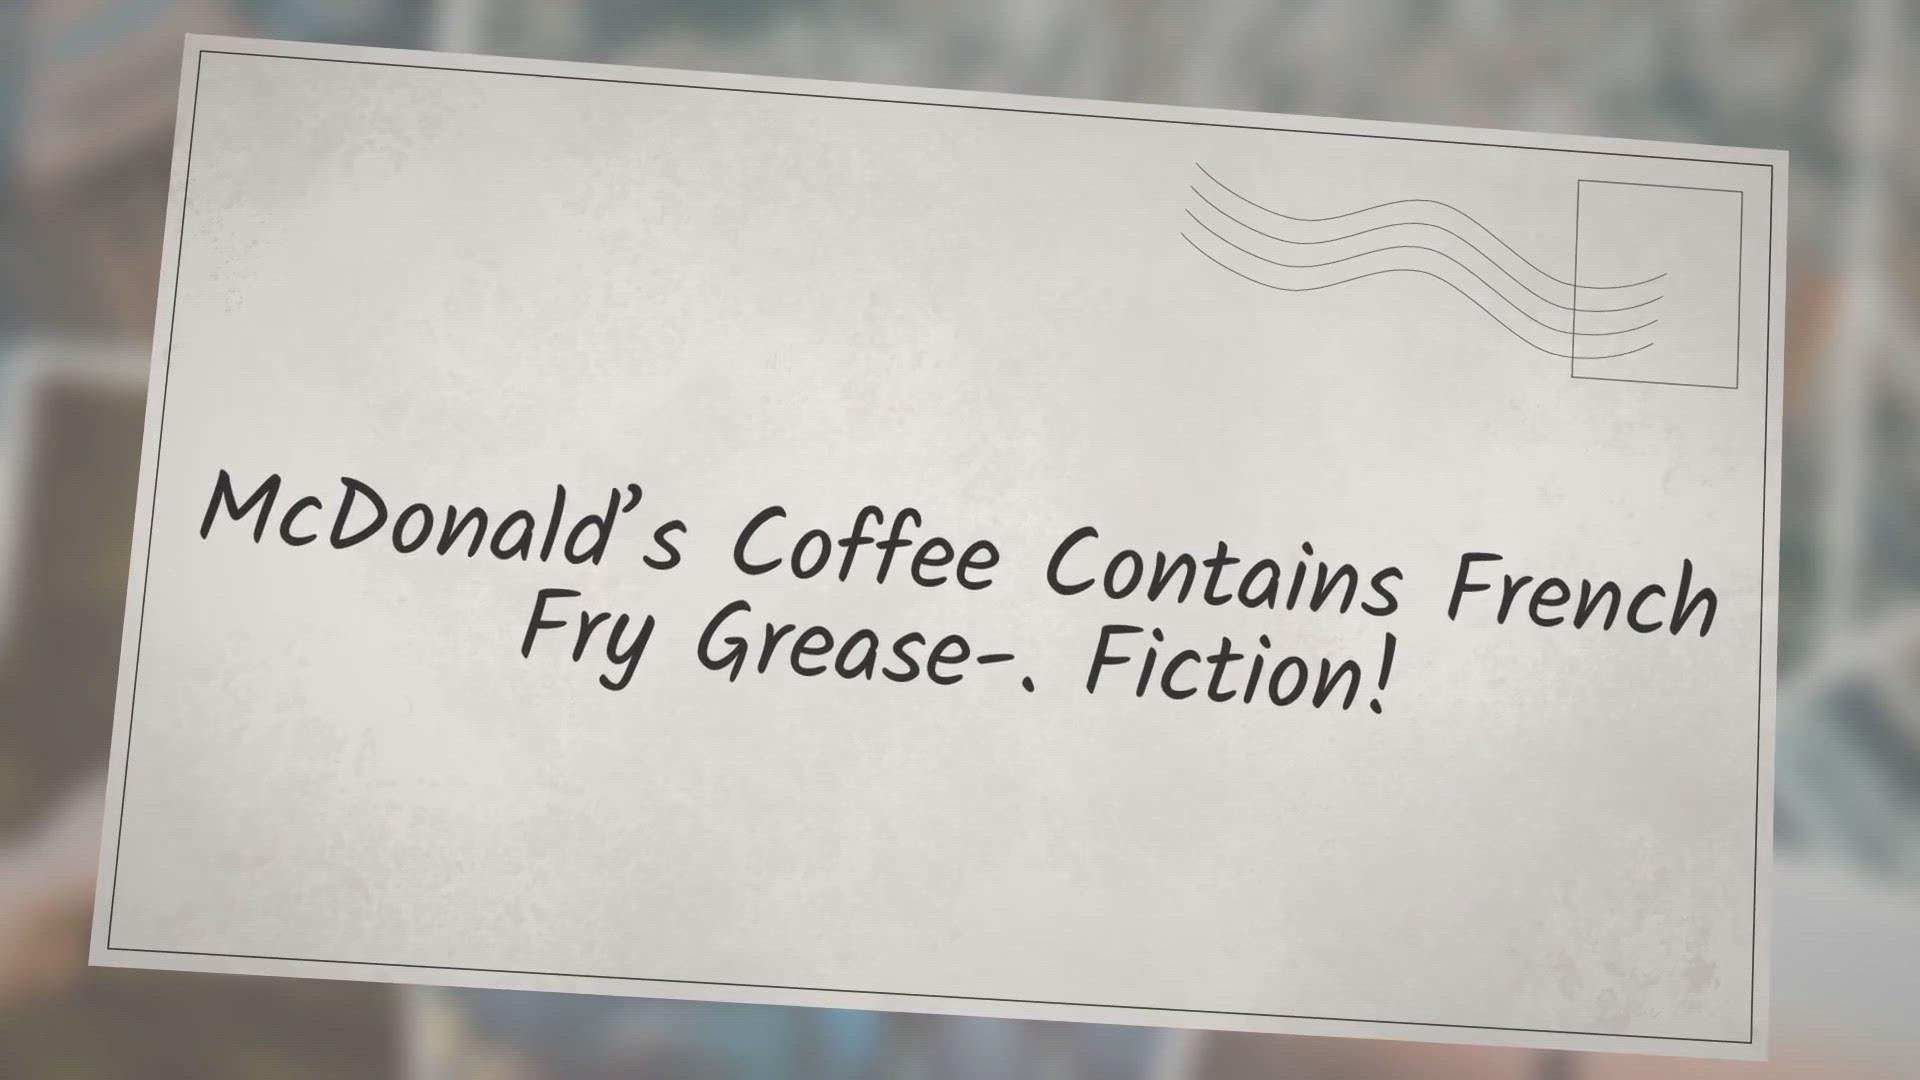 'Video thumbnail for McDonald’s Coffee Contains French Fry Grease-Fiction!'